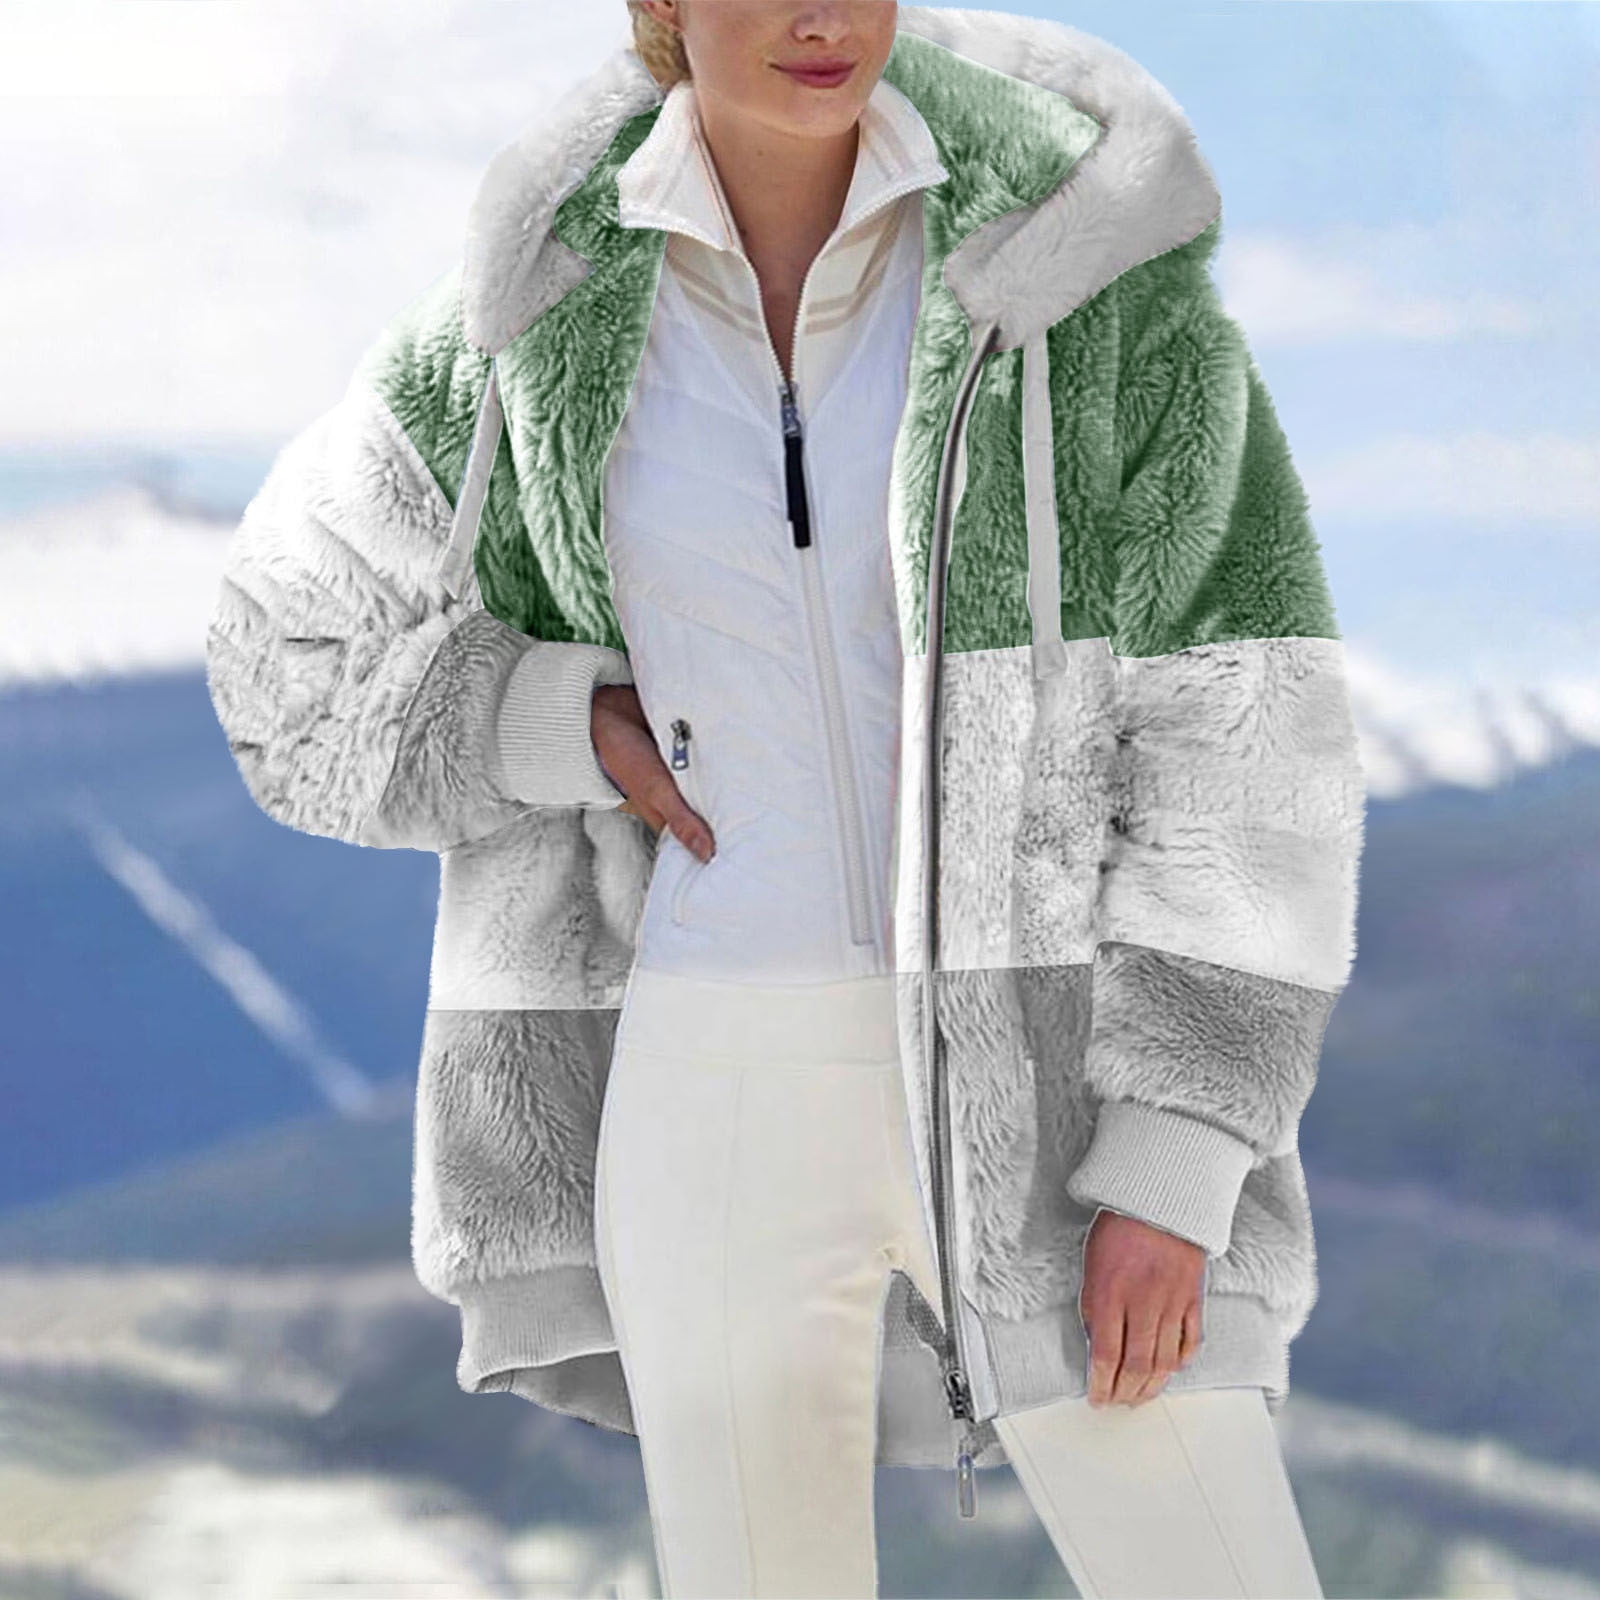  jovati Today 2023Women Oversized Fuzzy Warm Jackets Fall Plush  and Thick Standing Collar Zipper Up Fashion Winter Coat Fleece  CardiganDeals Under 10 Dollars : Sports & Outdoors